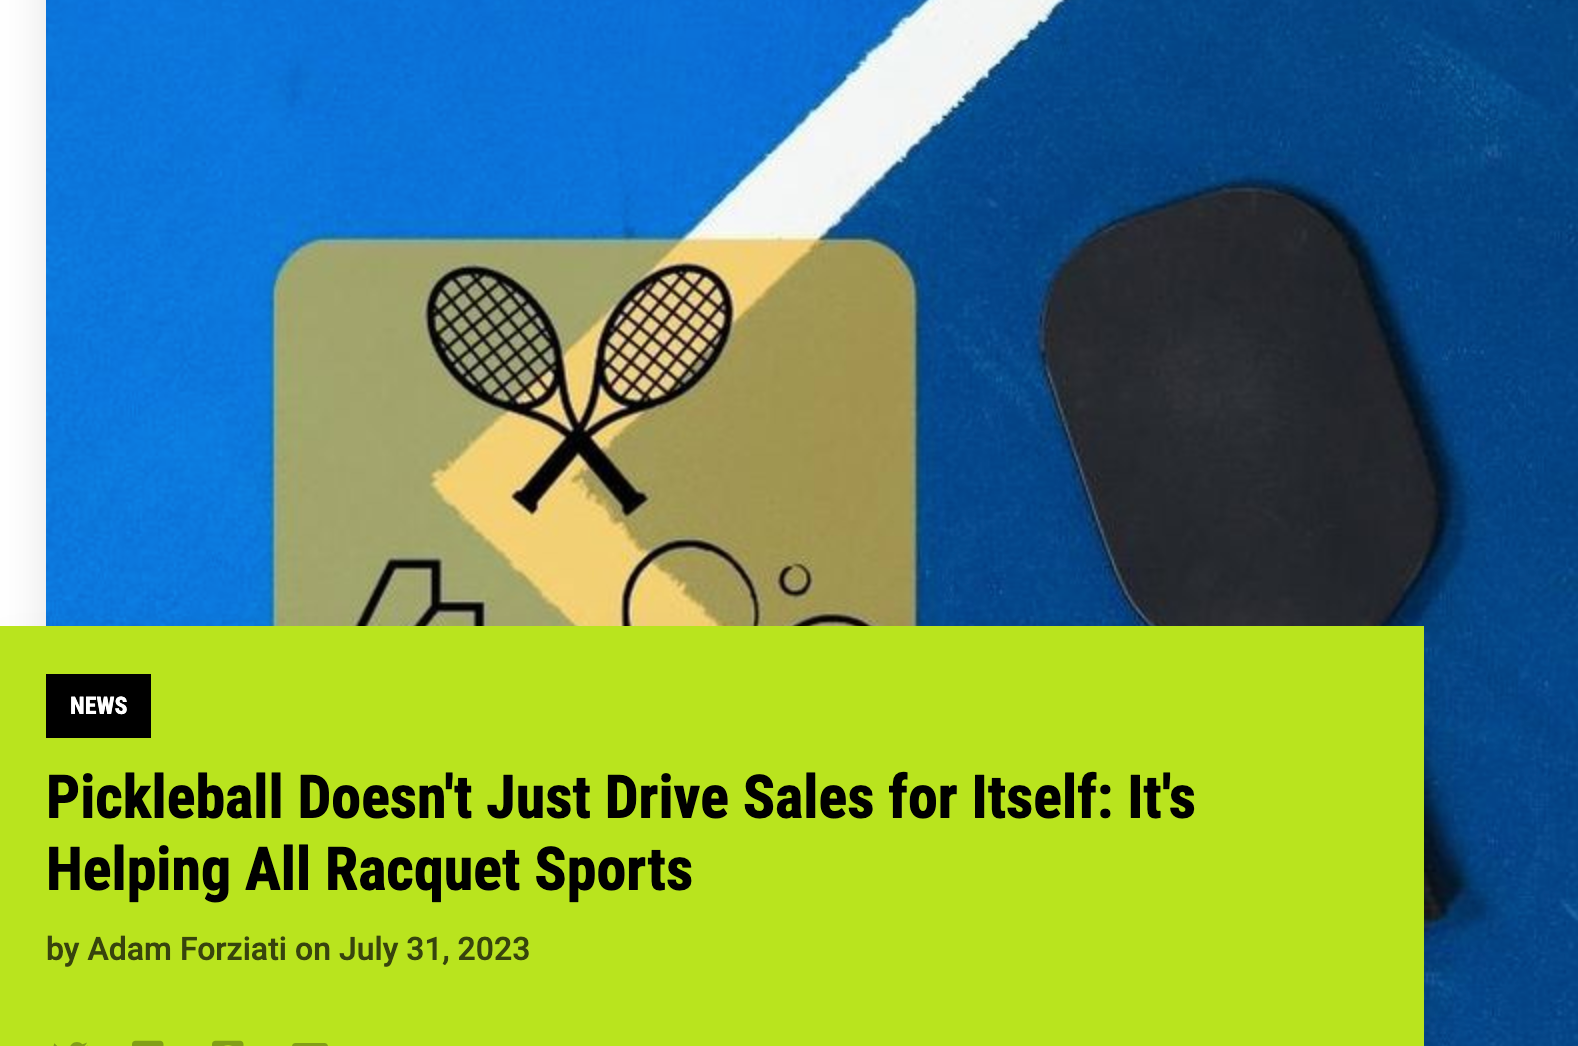 pickleball superstore - the retail sales growth of the pickleball industry